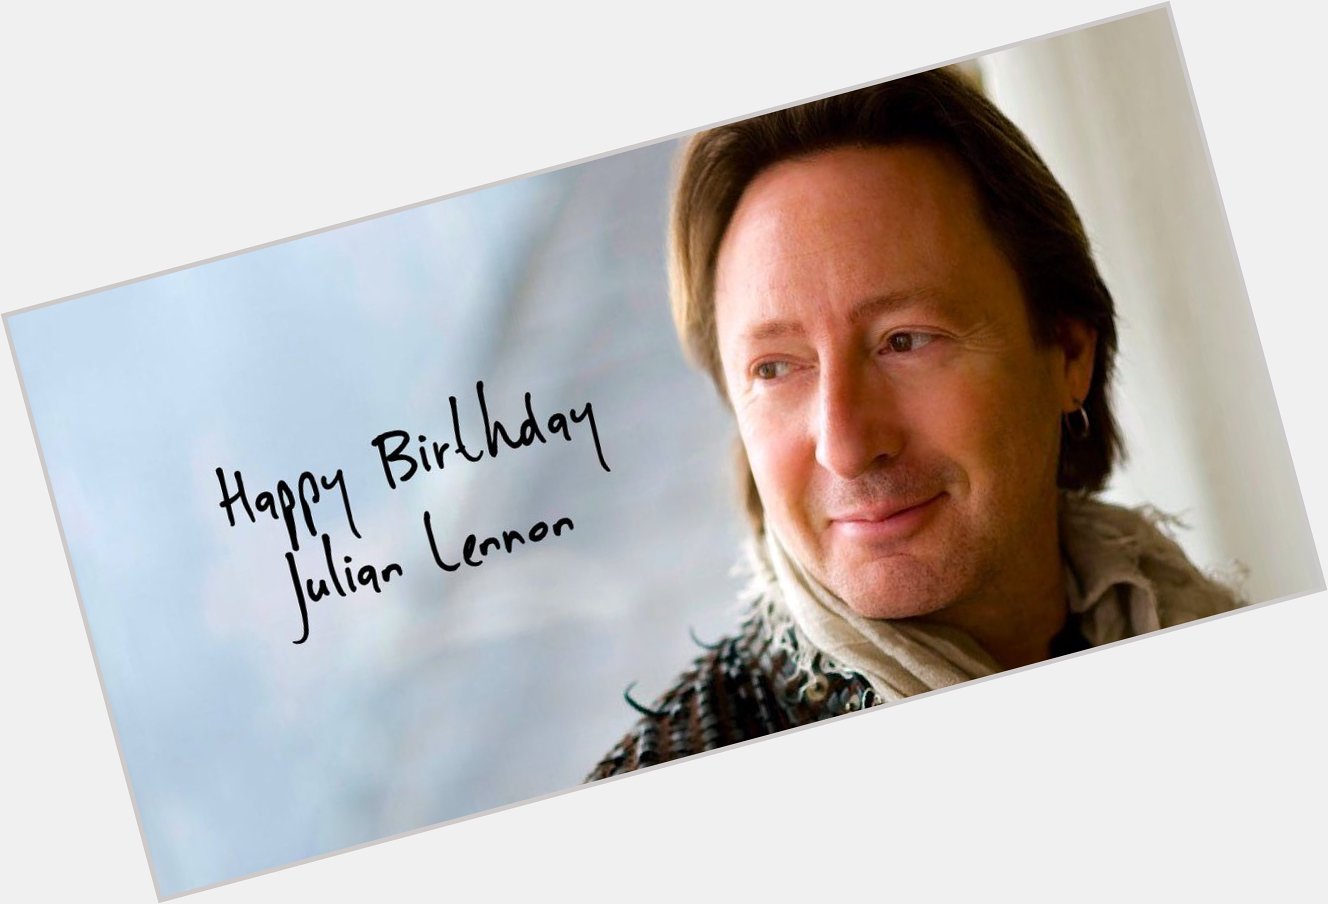 A big HAPPY BIRTHDAY shoutout to JULIAN LENNON turning 55 YEARS old today! 